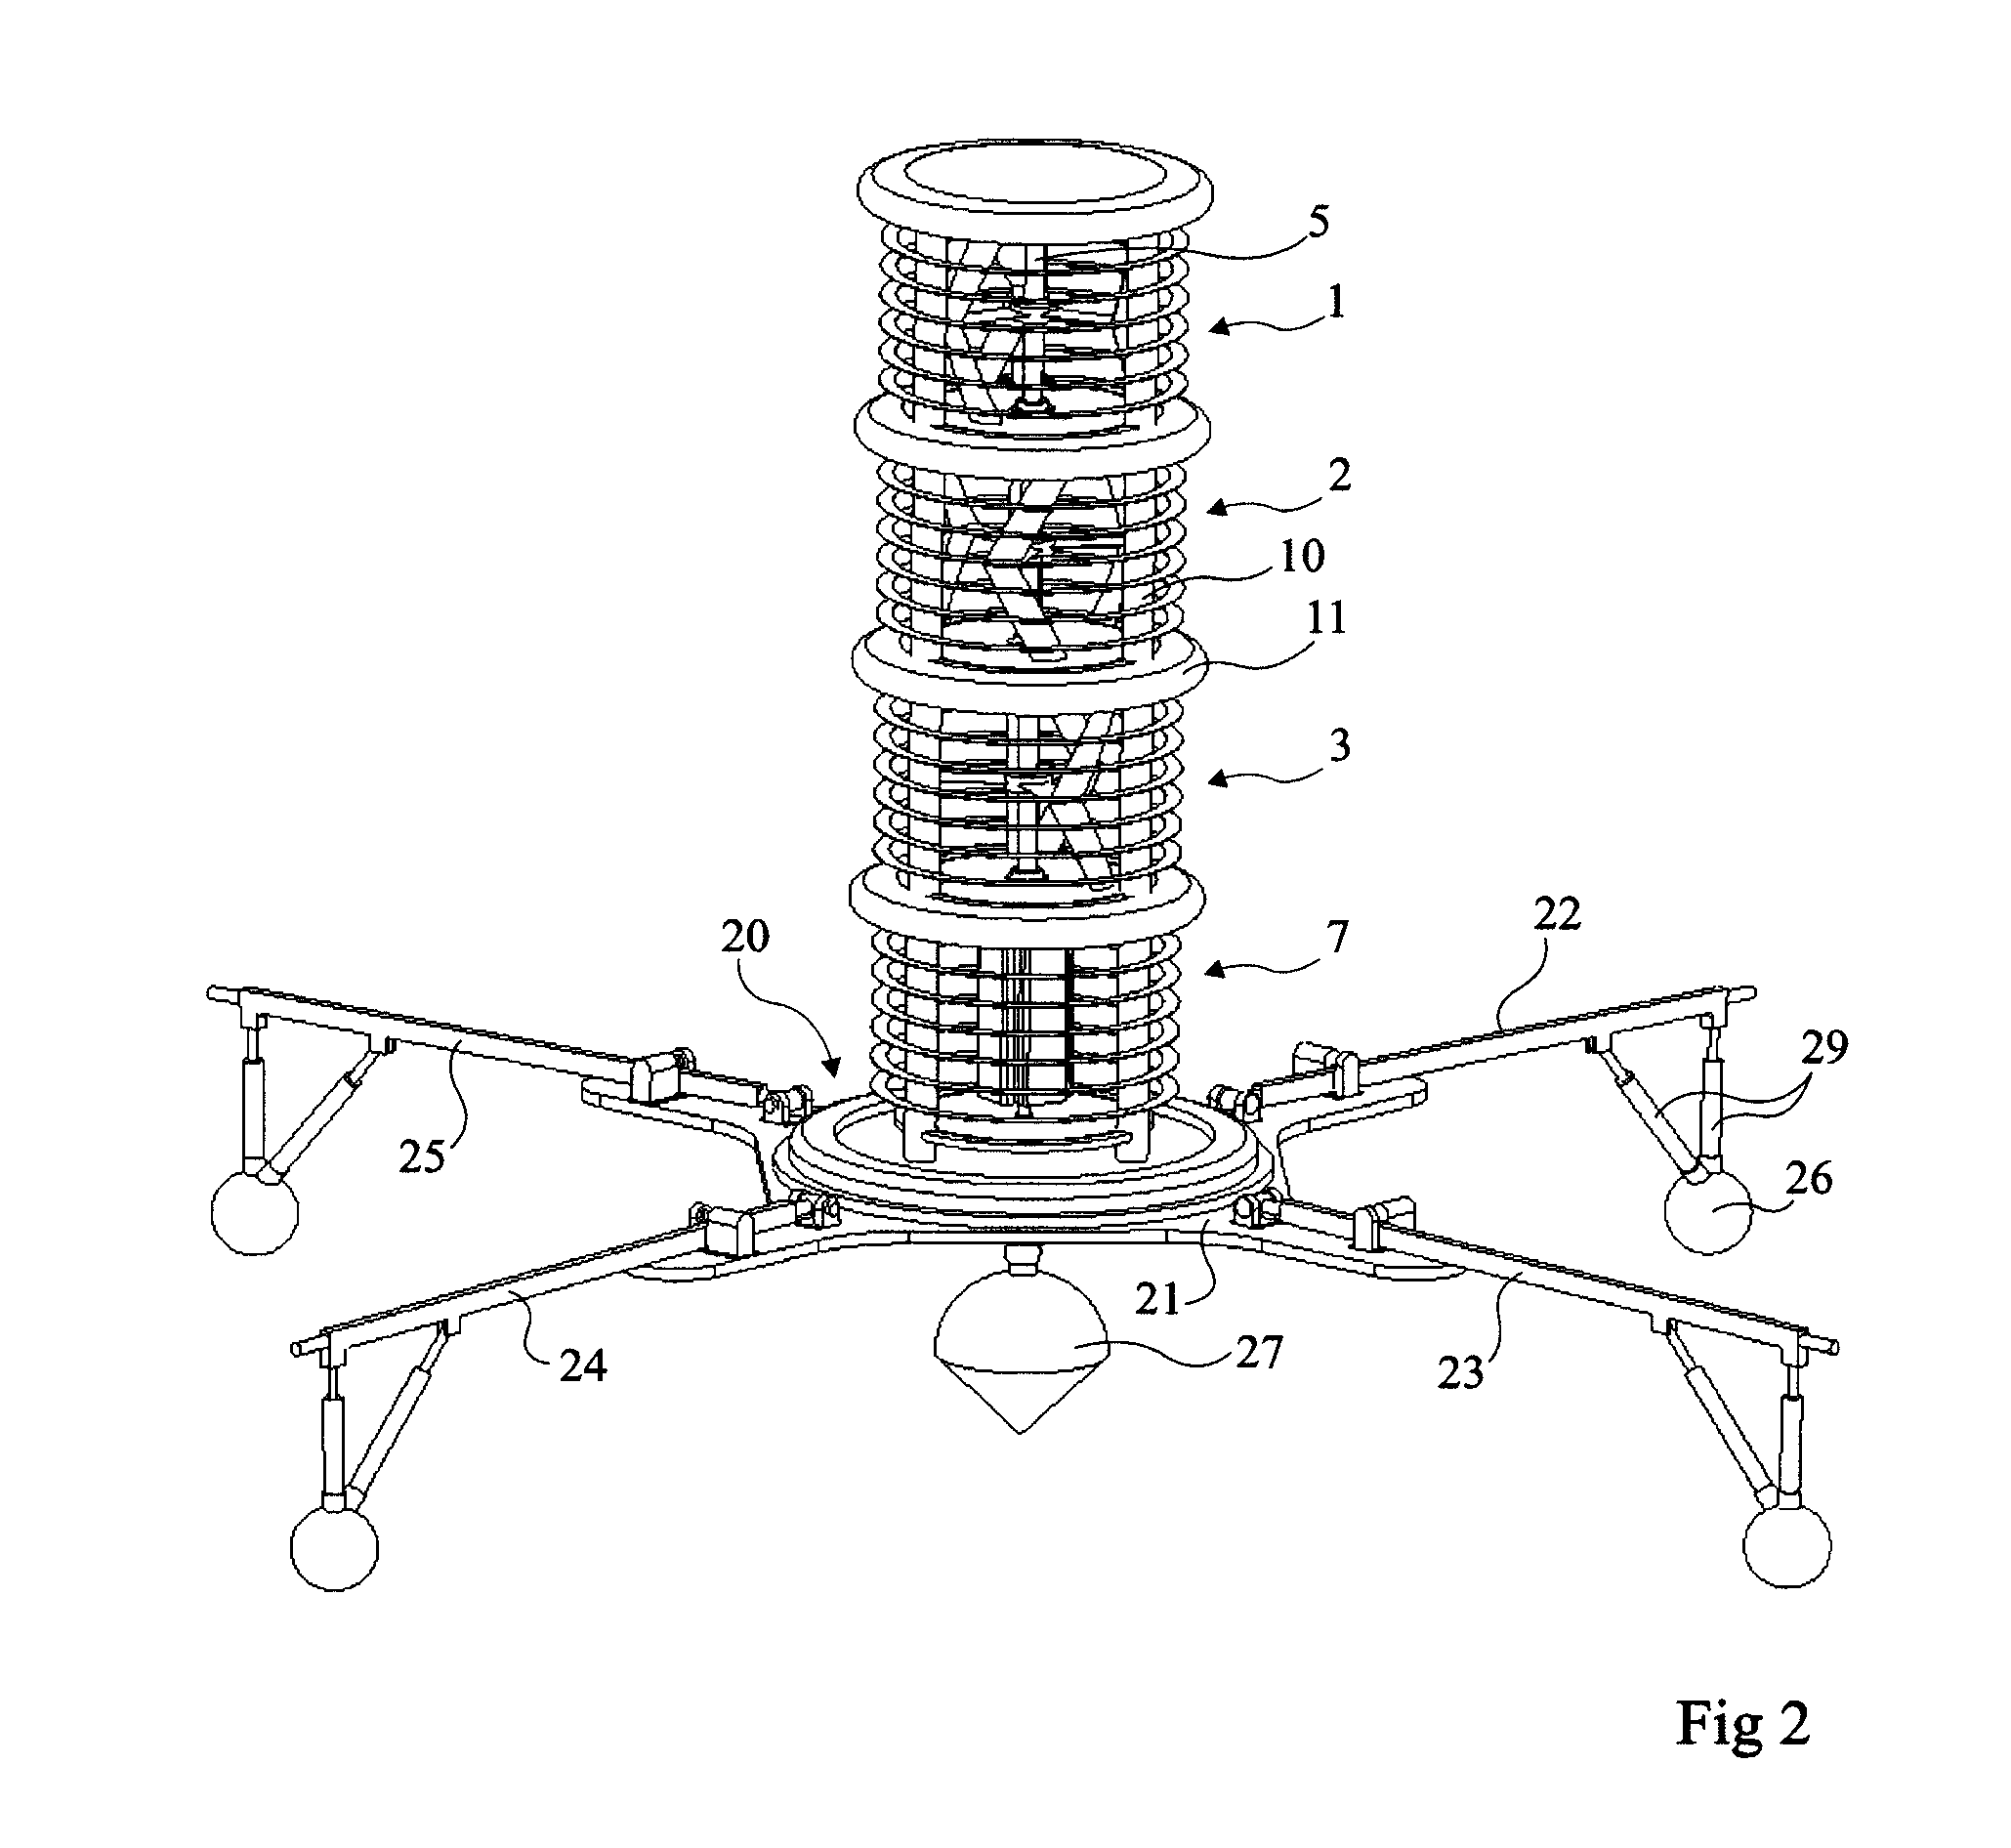 System and method for submerging a hydraulic turbine engine